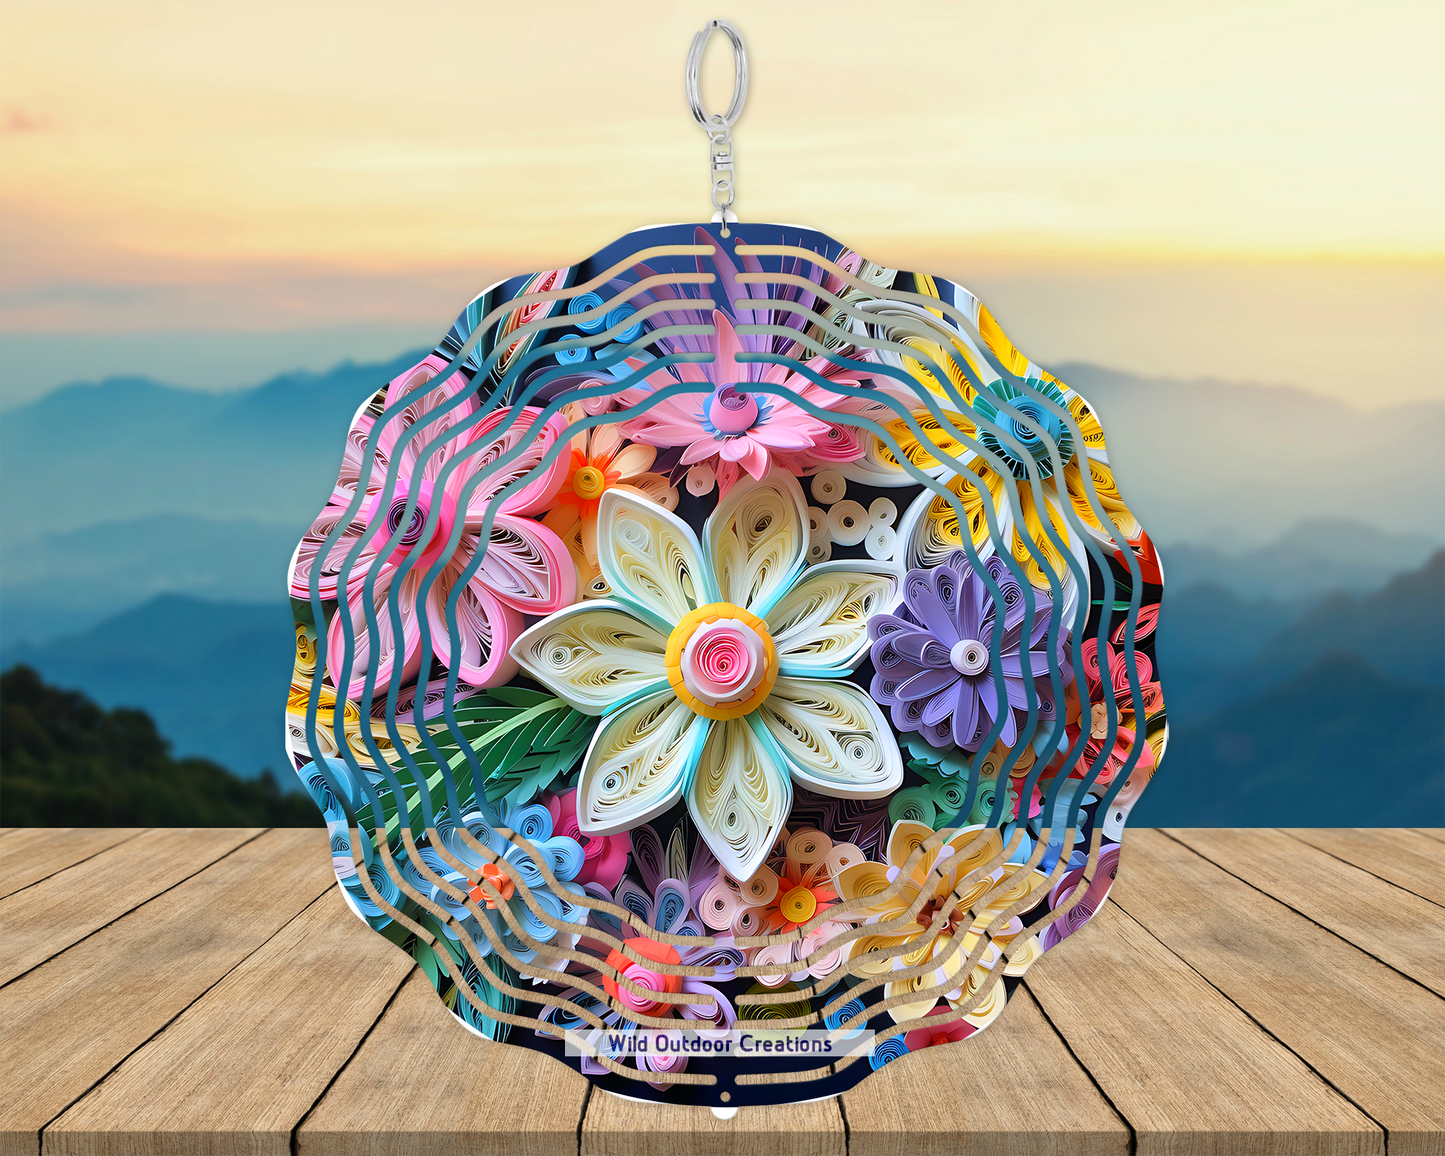 Pastel Floral 3D 10'in Wind Spinner, Unique Gifts for Her